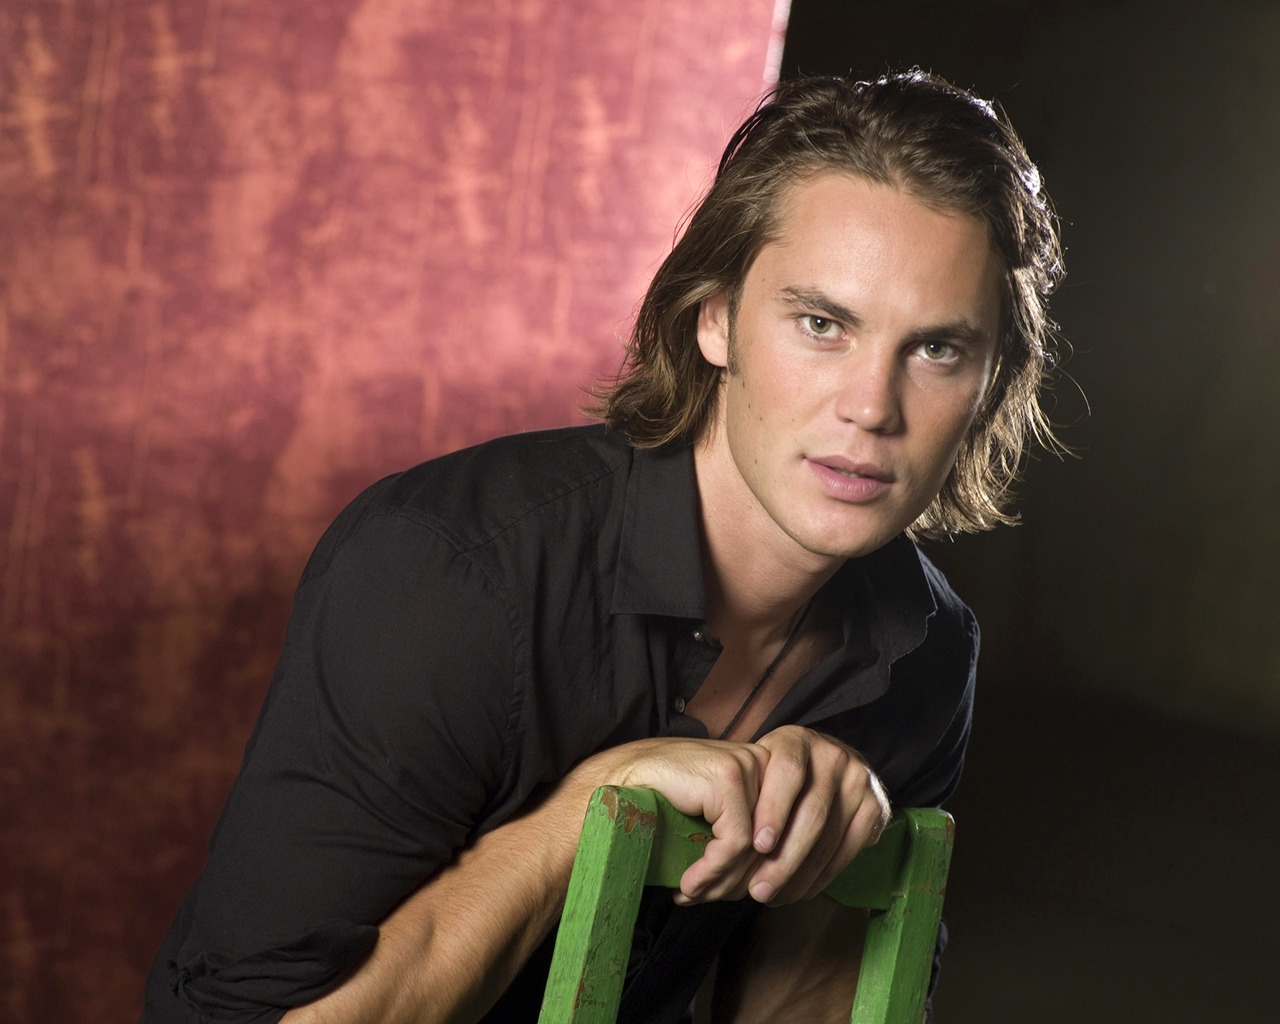 Taylor Kitsch for 1280 x 1024 resolution